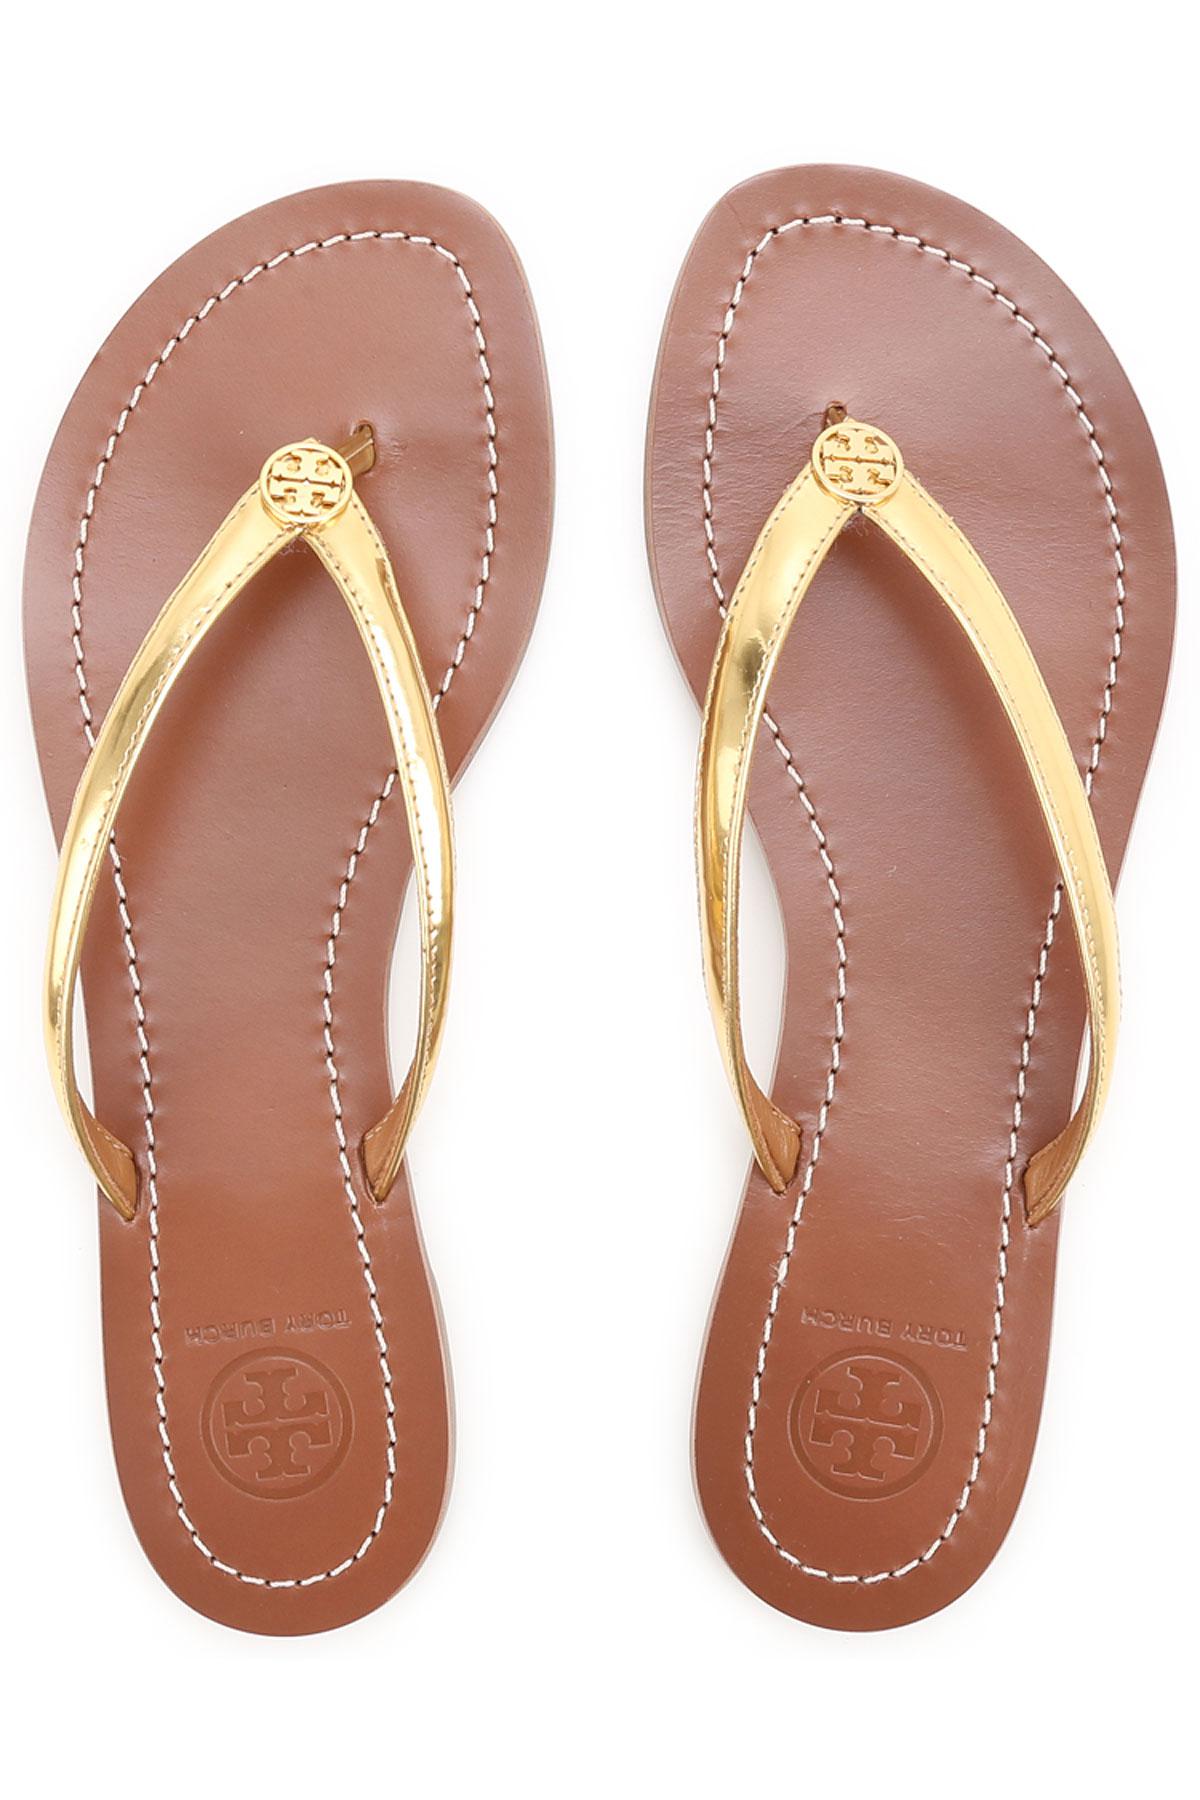 Tory Burch Sandals For Women On Sale In Outlet in Gold (Metallic) - Lyst